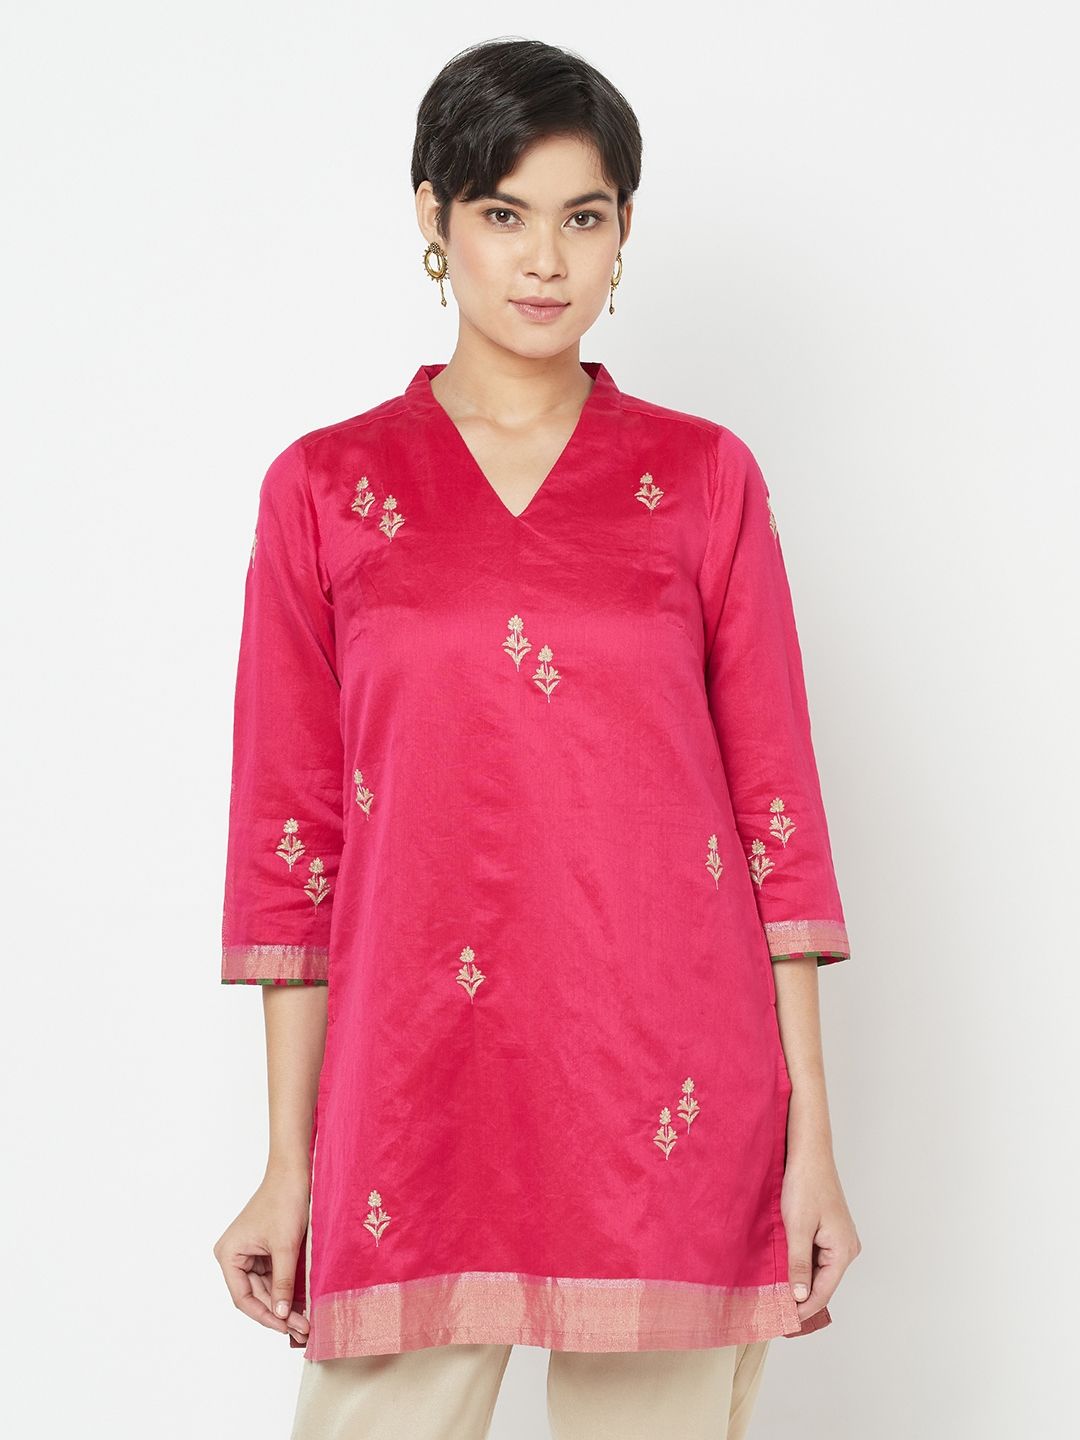 Fabindia Pink Embroidered Tunic Price in India